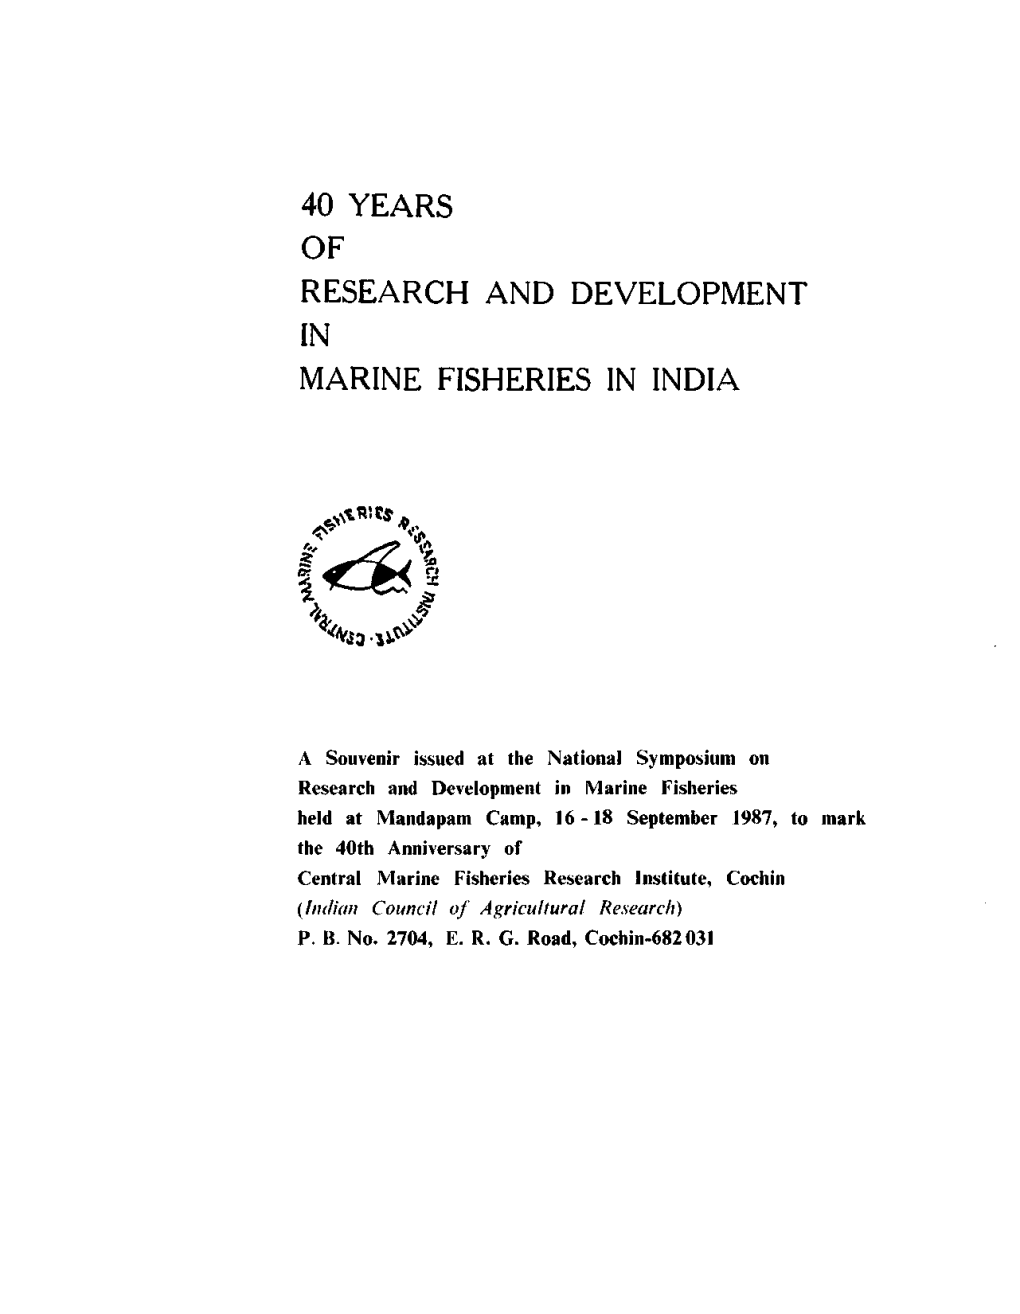 40 Years of Research and Development in Marine Fisheries in India